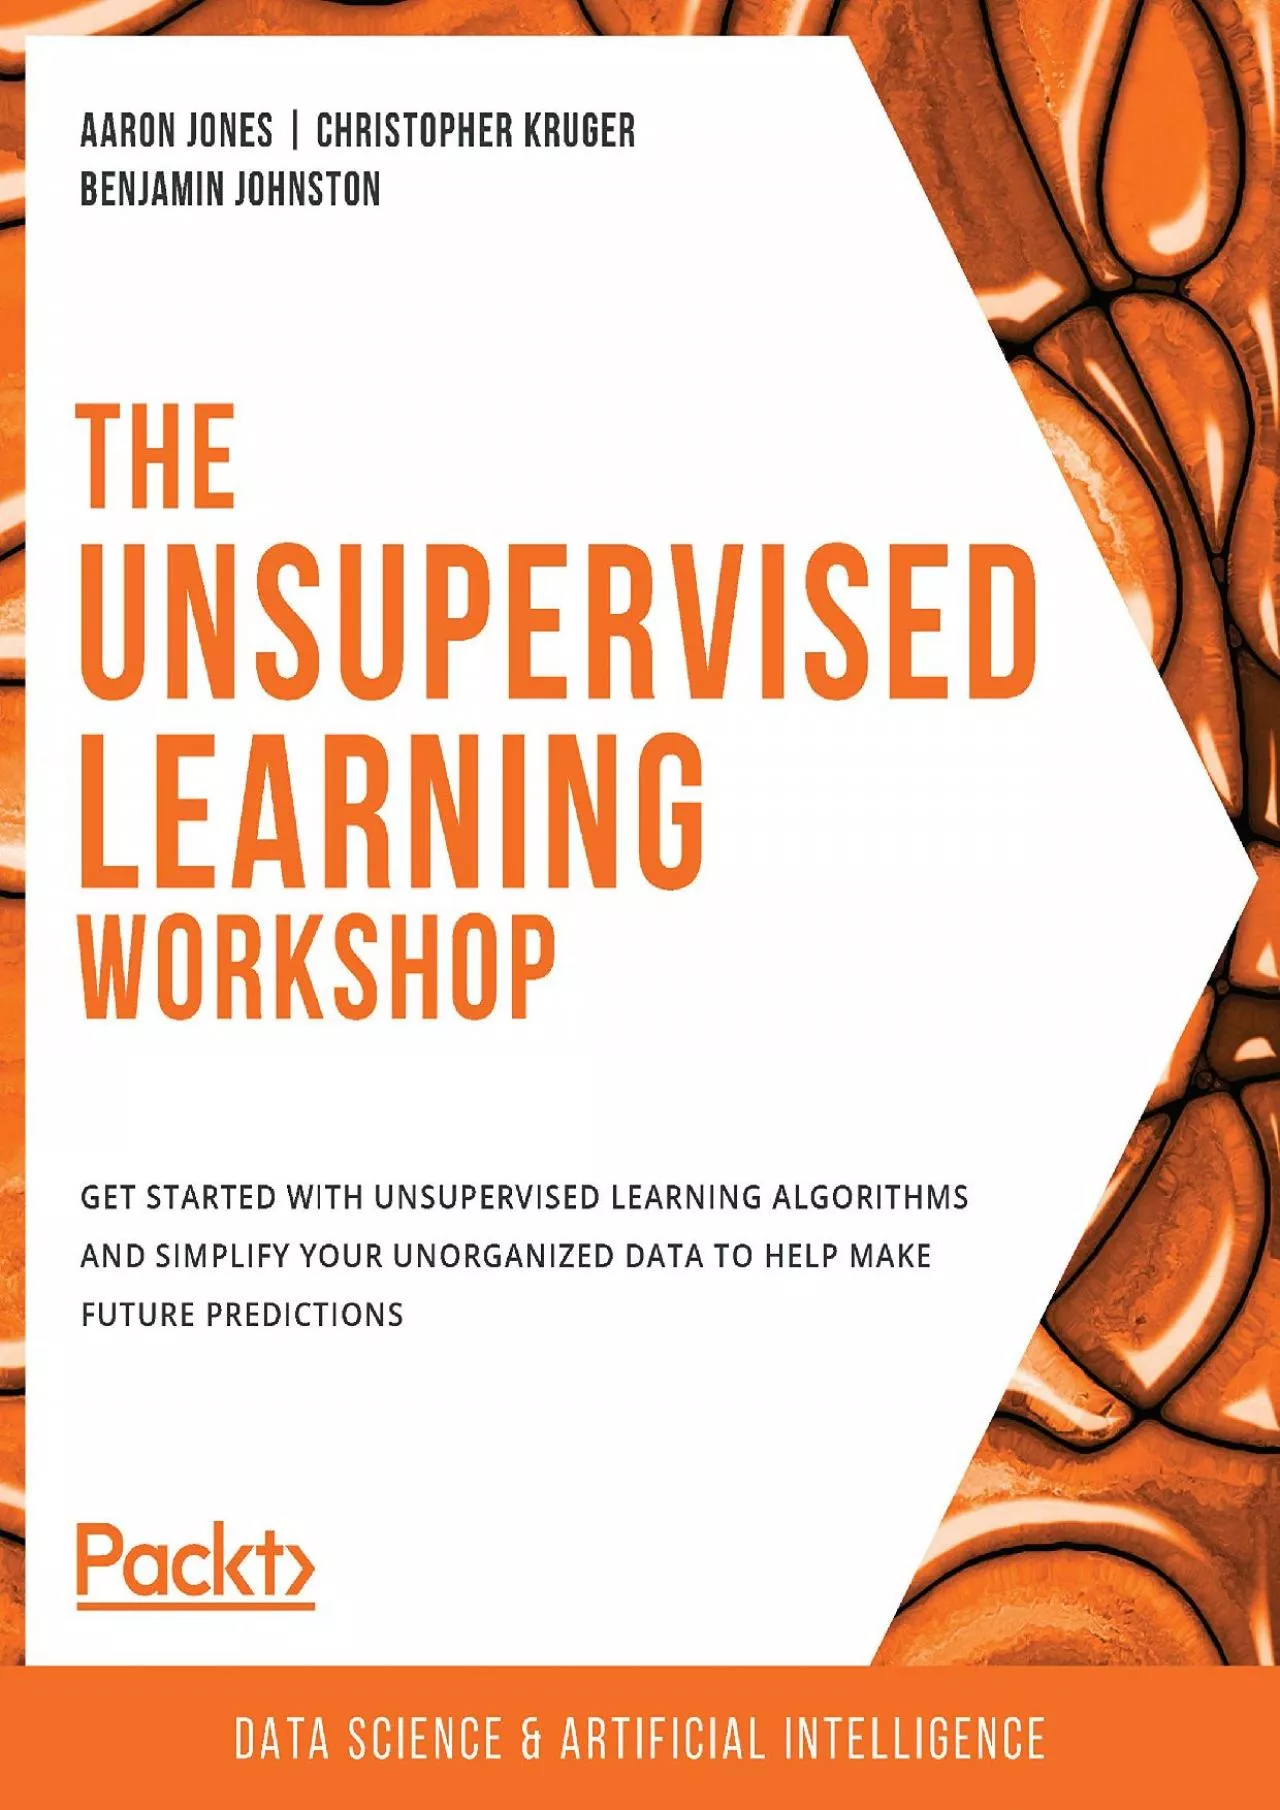 [READING BOOK]-The Unsupervised Learning Workshop: Get started with unsupervised learning